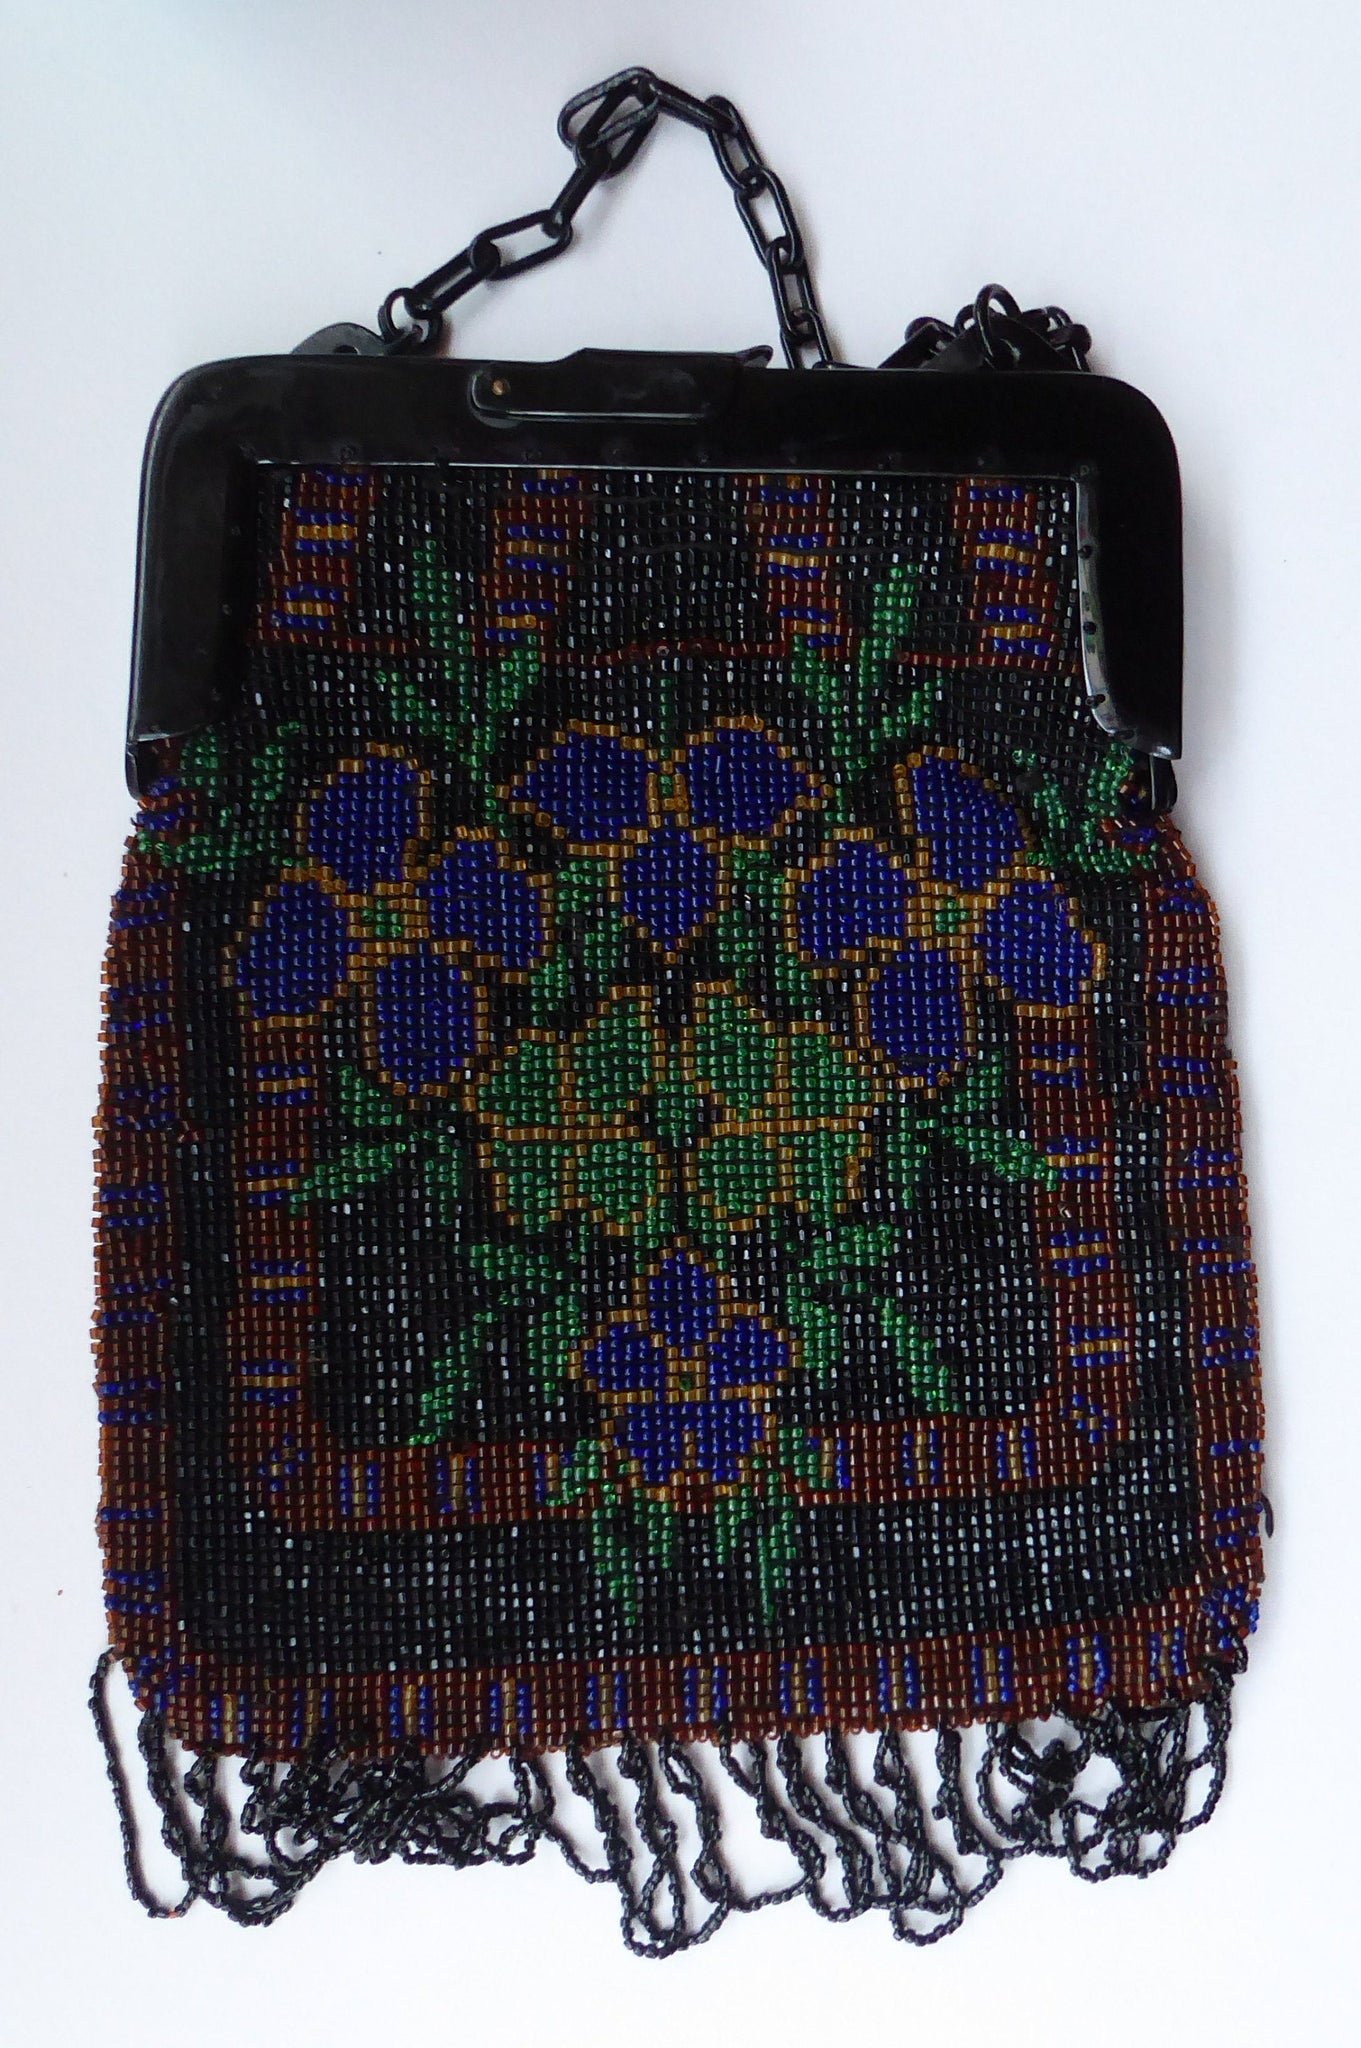 ART DECO Glass Beaded Bag with Unusual Black Clasp and Handle